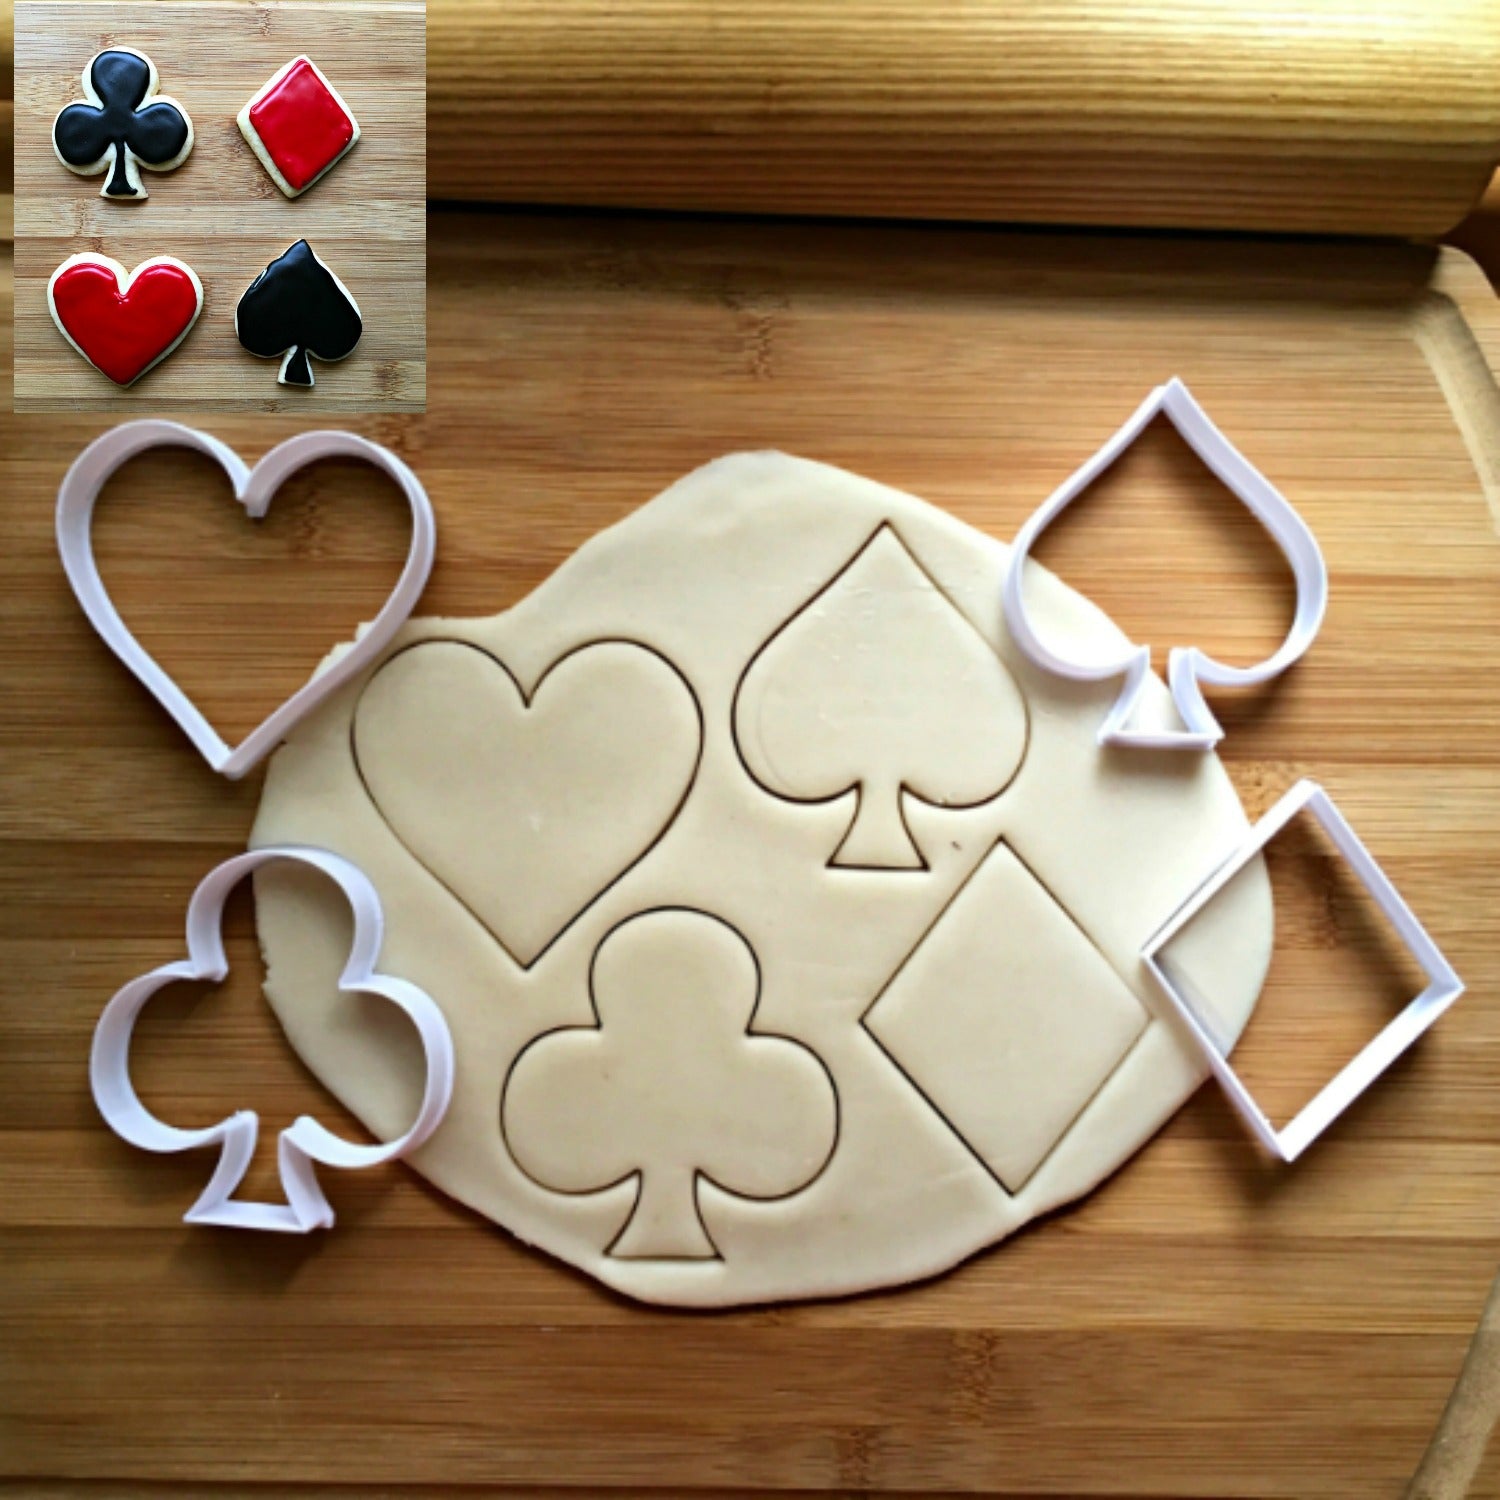 Set of 4 Playing Card Shapes Cookie Cutters/Dishwasher Safe